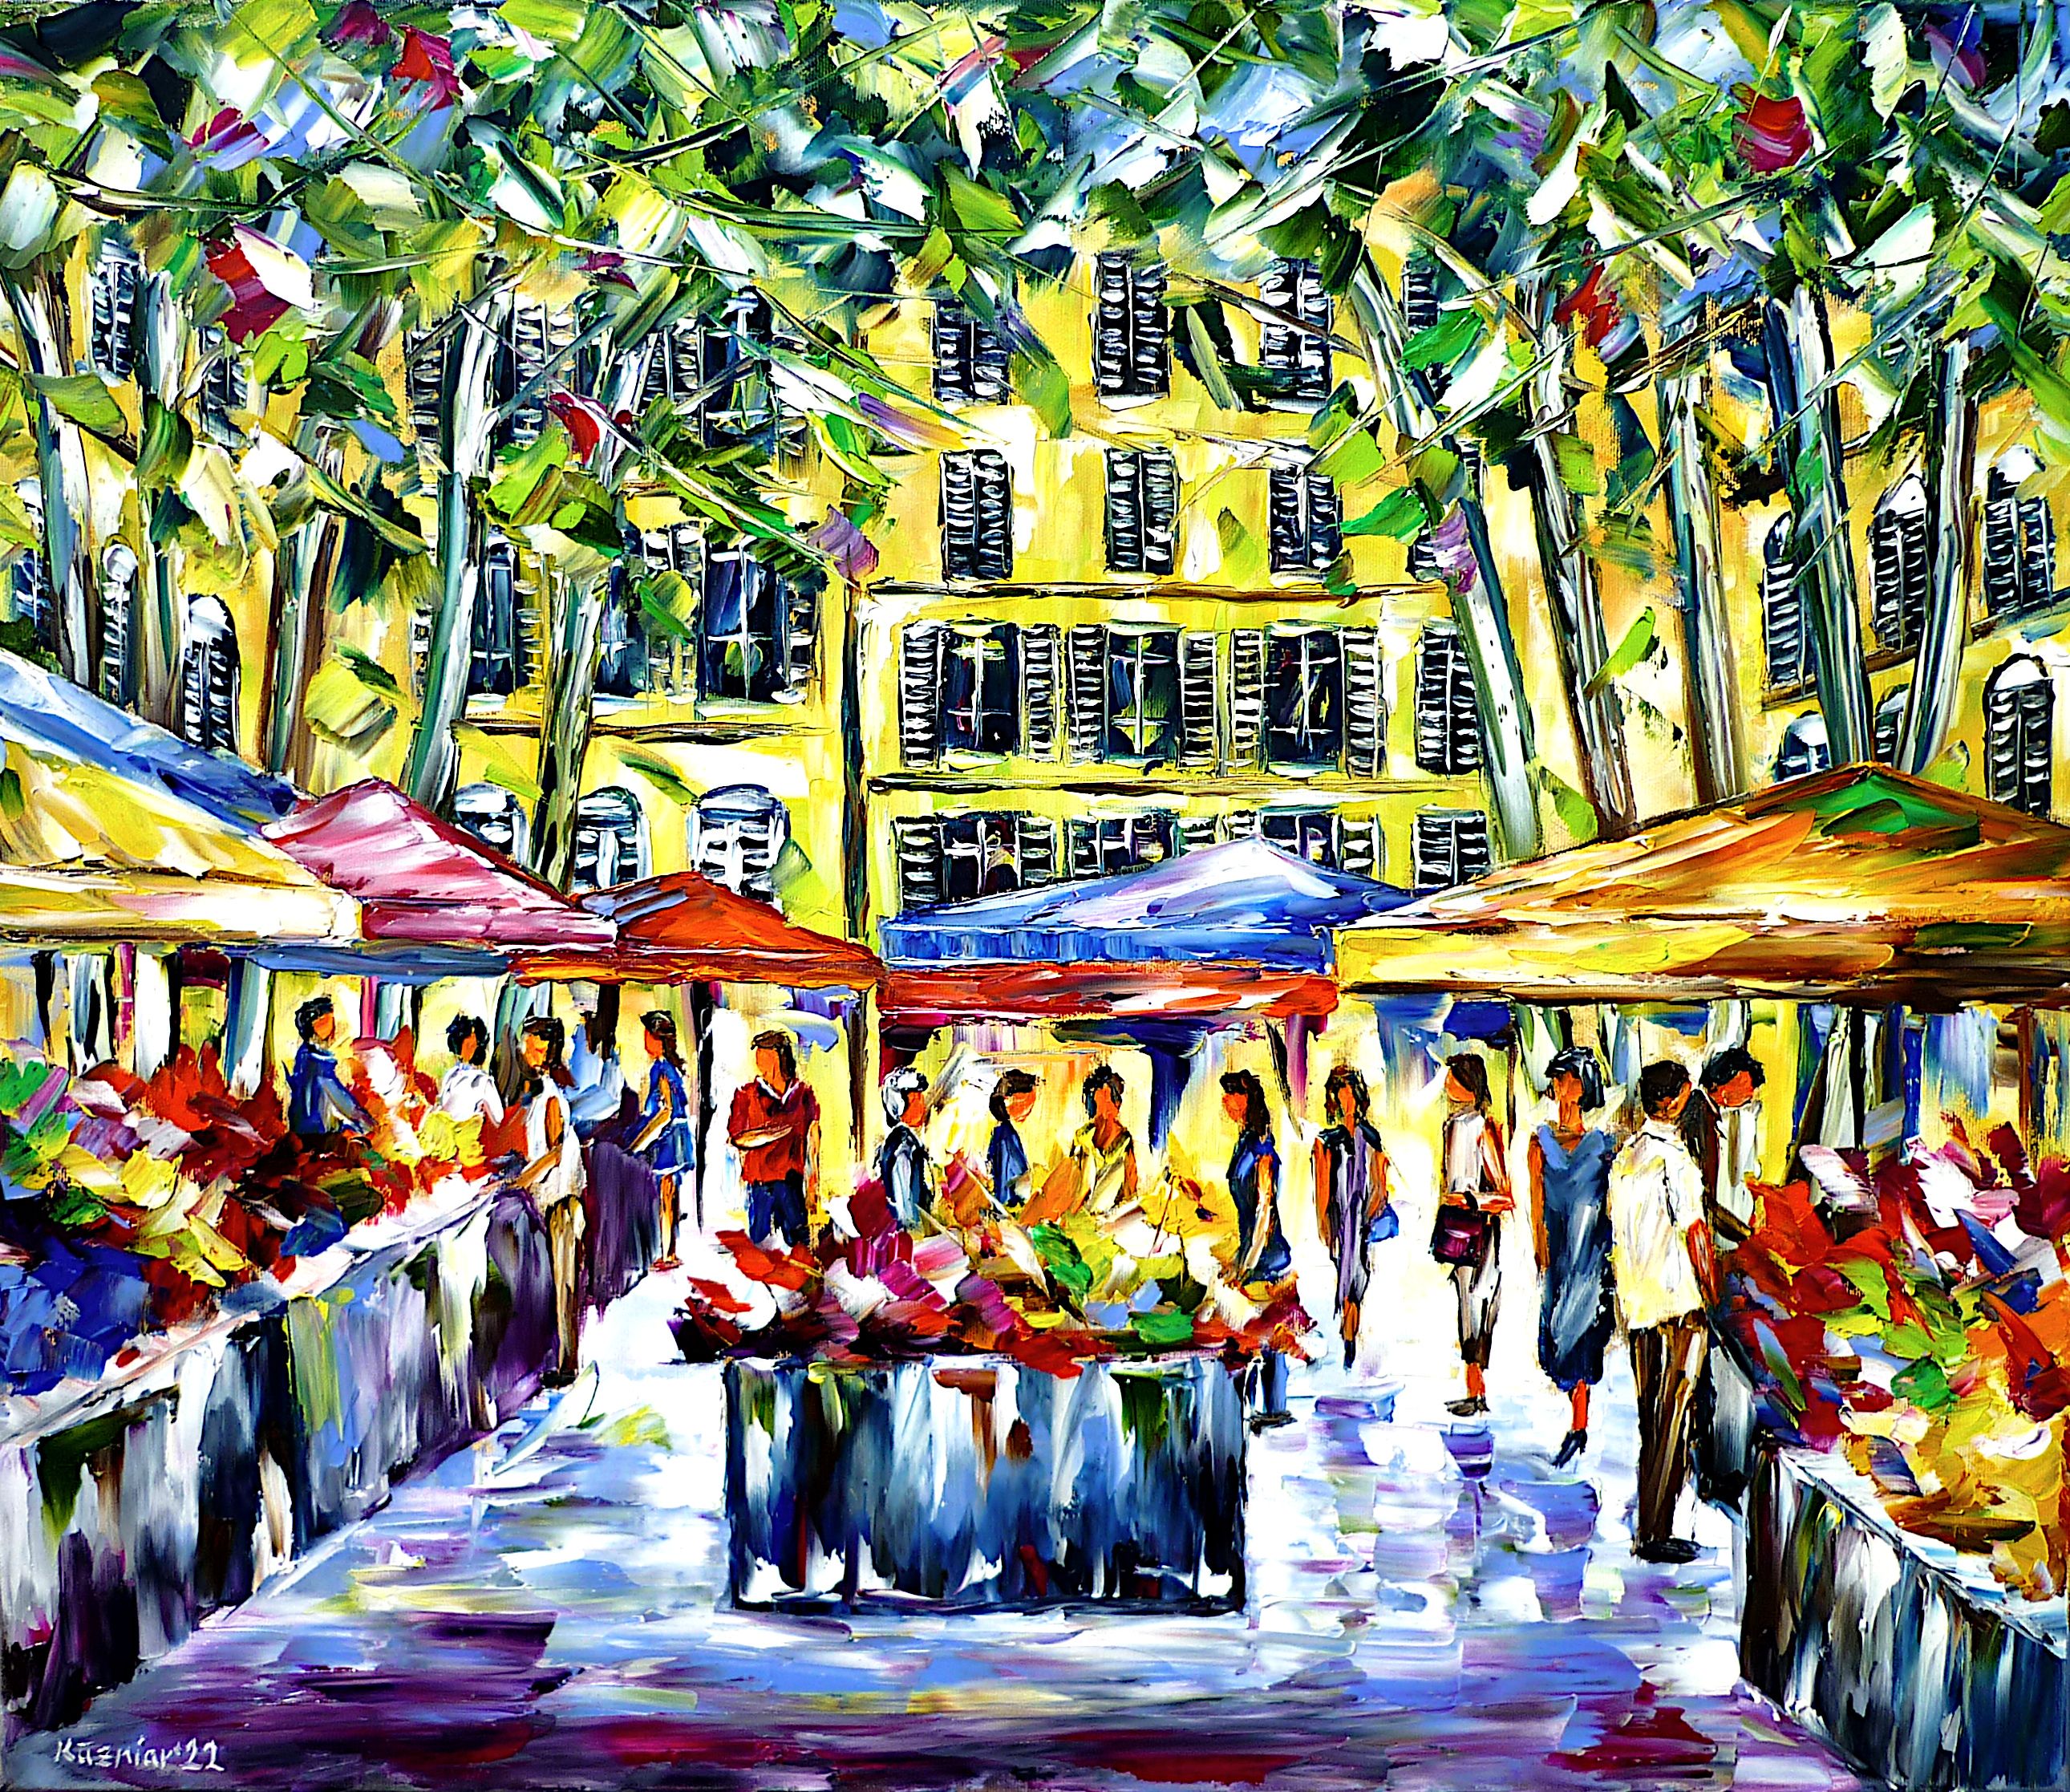 market in Aix-en-Provence,market scene,people in the market,market stall,market stalls market life,marketplace,people strolling,strolling people,market stroll,city stroll,market people,market picture,market painting,flea market,flower market,flower stall,large parasols,market in the city,market day,colorful market,market love,market visitors,market goers,market in provence,provence cityscape,Old town of Aix,Aix-en-Provence,France,southern France,Provence,Cote d'Azur,summer in Provence,summer in southern france,people in summer,summer feelings,summer picture,summer painting,summer scenery,beautiful provence,summer day,sunlight,summer time,enjoy life,under the trees,provence beauty,provence love,provence lover,france love,palette knife oil painting,modern art,impressionism,expressionism,abstract painting,lively colors,colorful painting,bright colors,light reflections,impasto painting,figurative